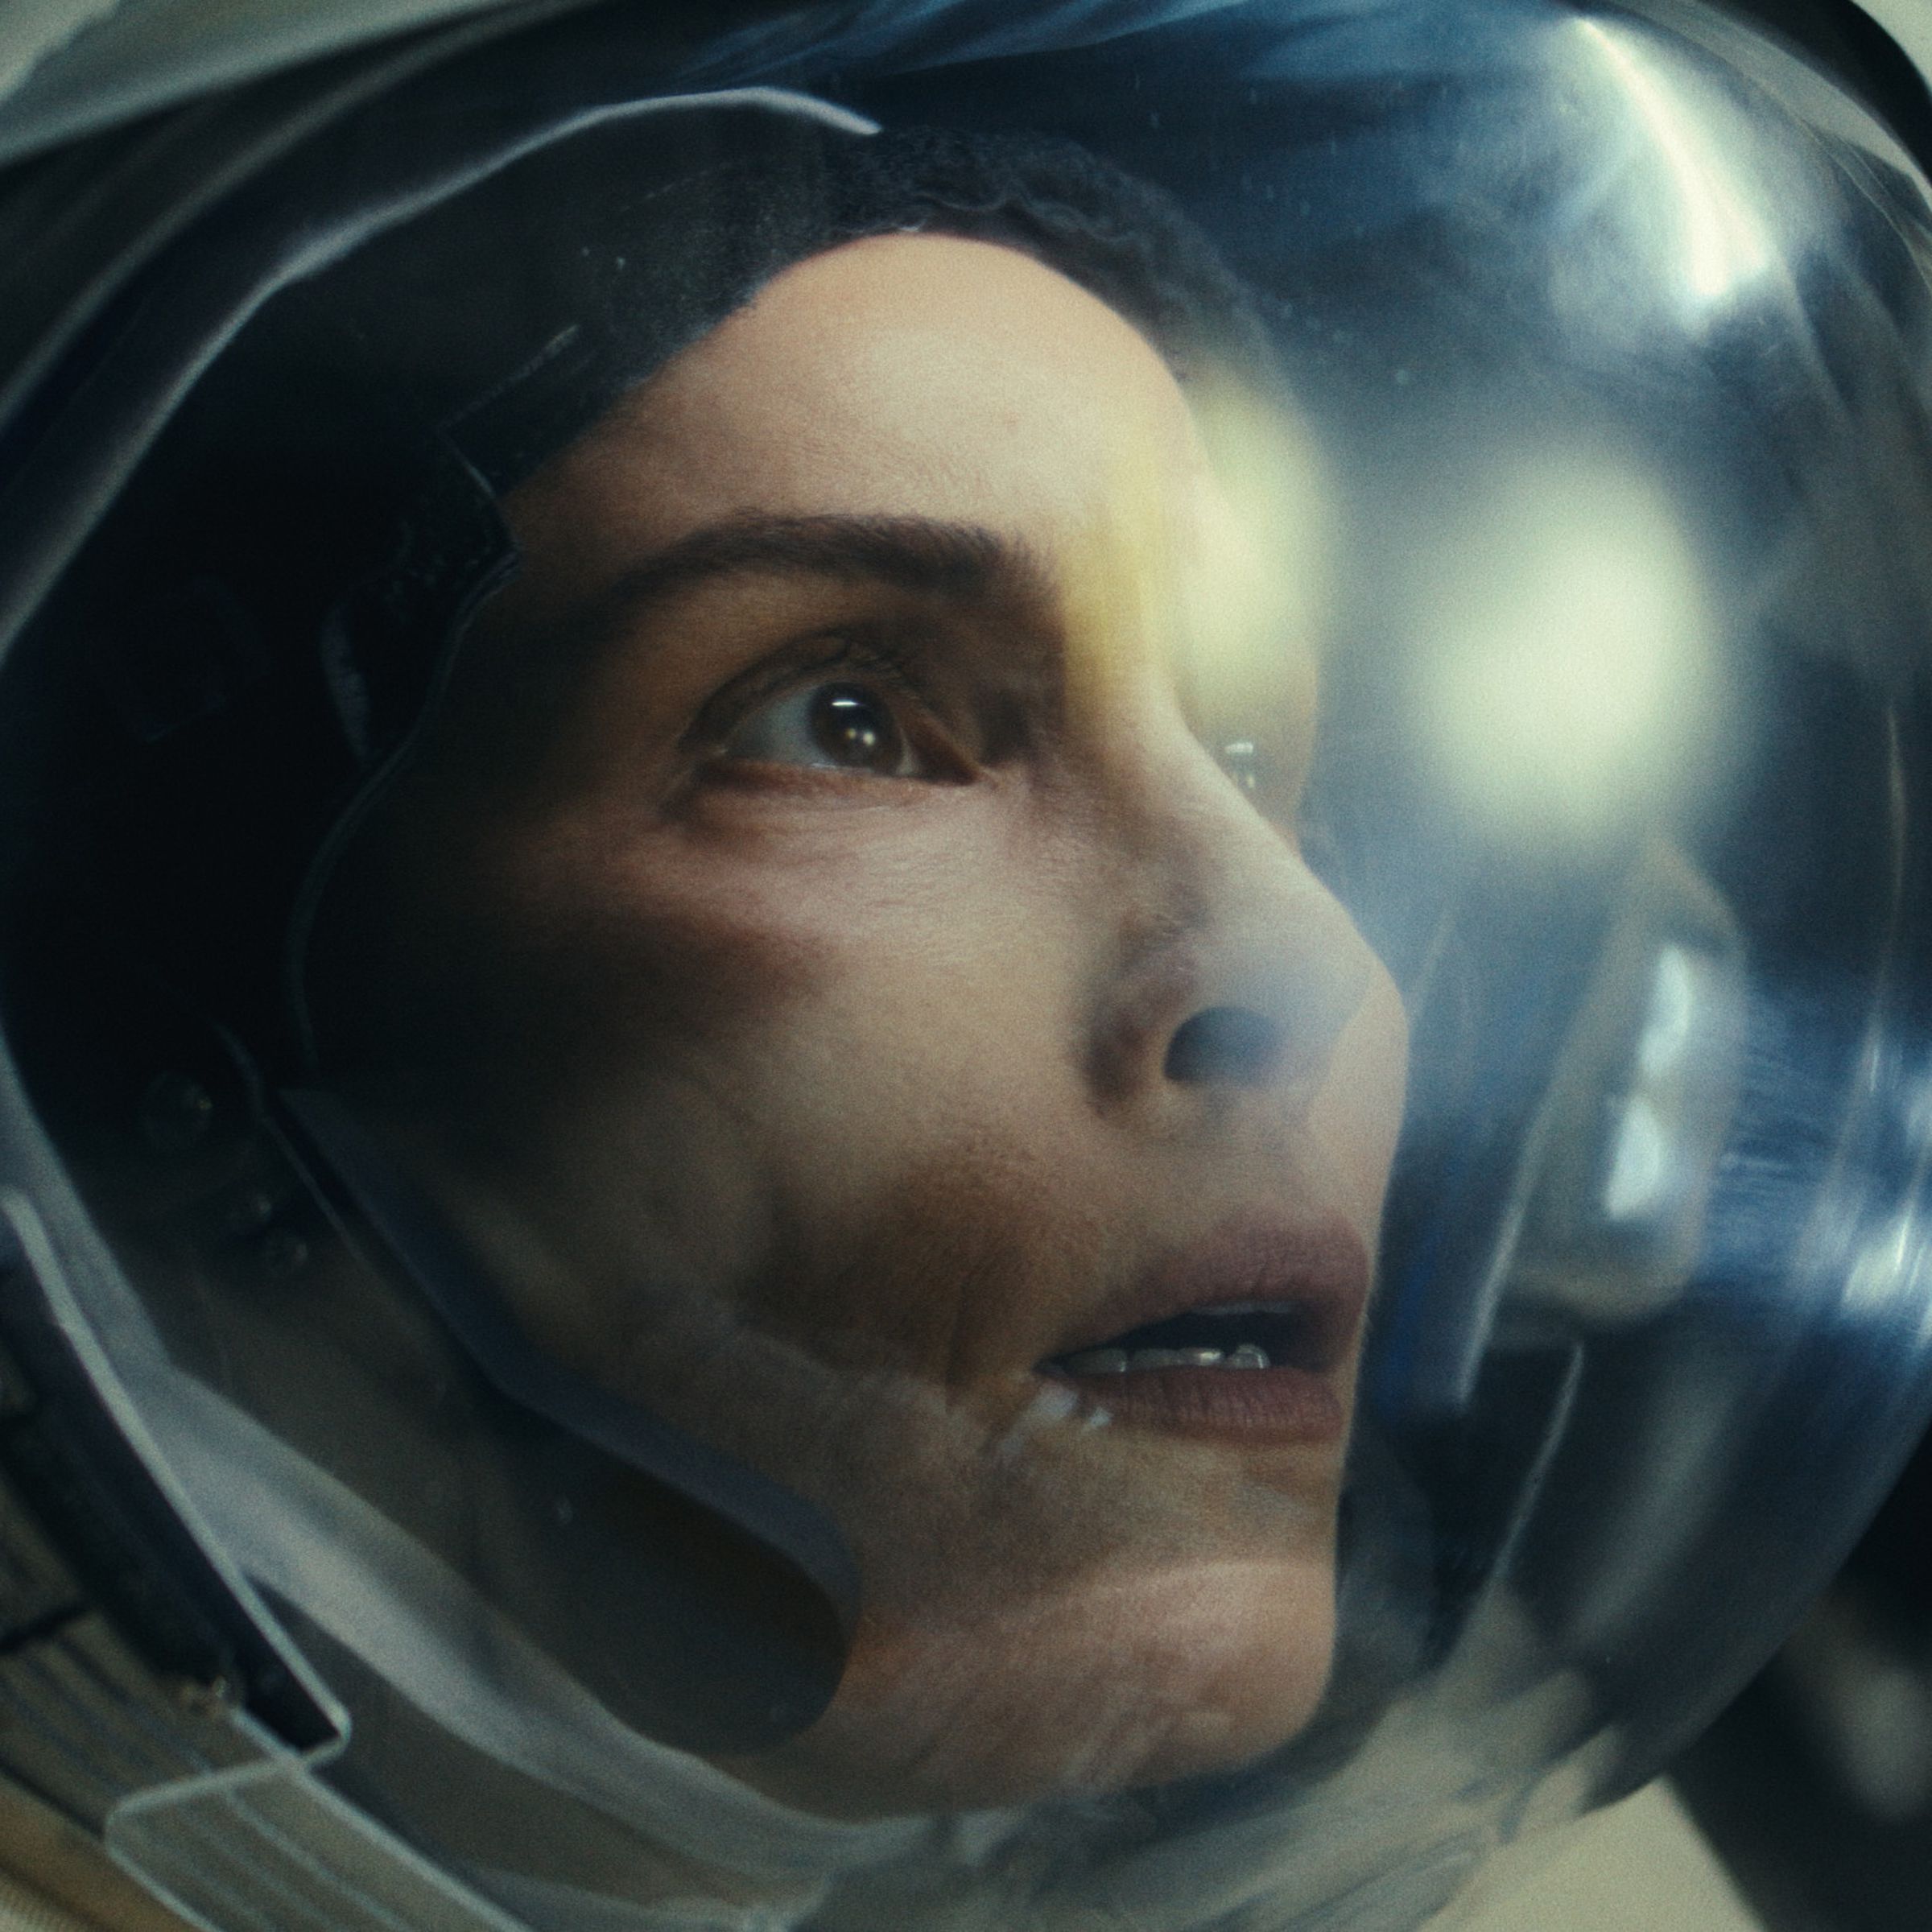 Picture of Noomi Rapace wearing an astronaut’s helmet, looking at something anxiously&nbsp;in a scene from the sci-fi TV series Constellation.